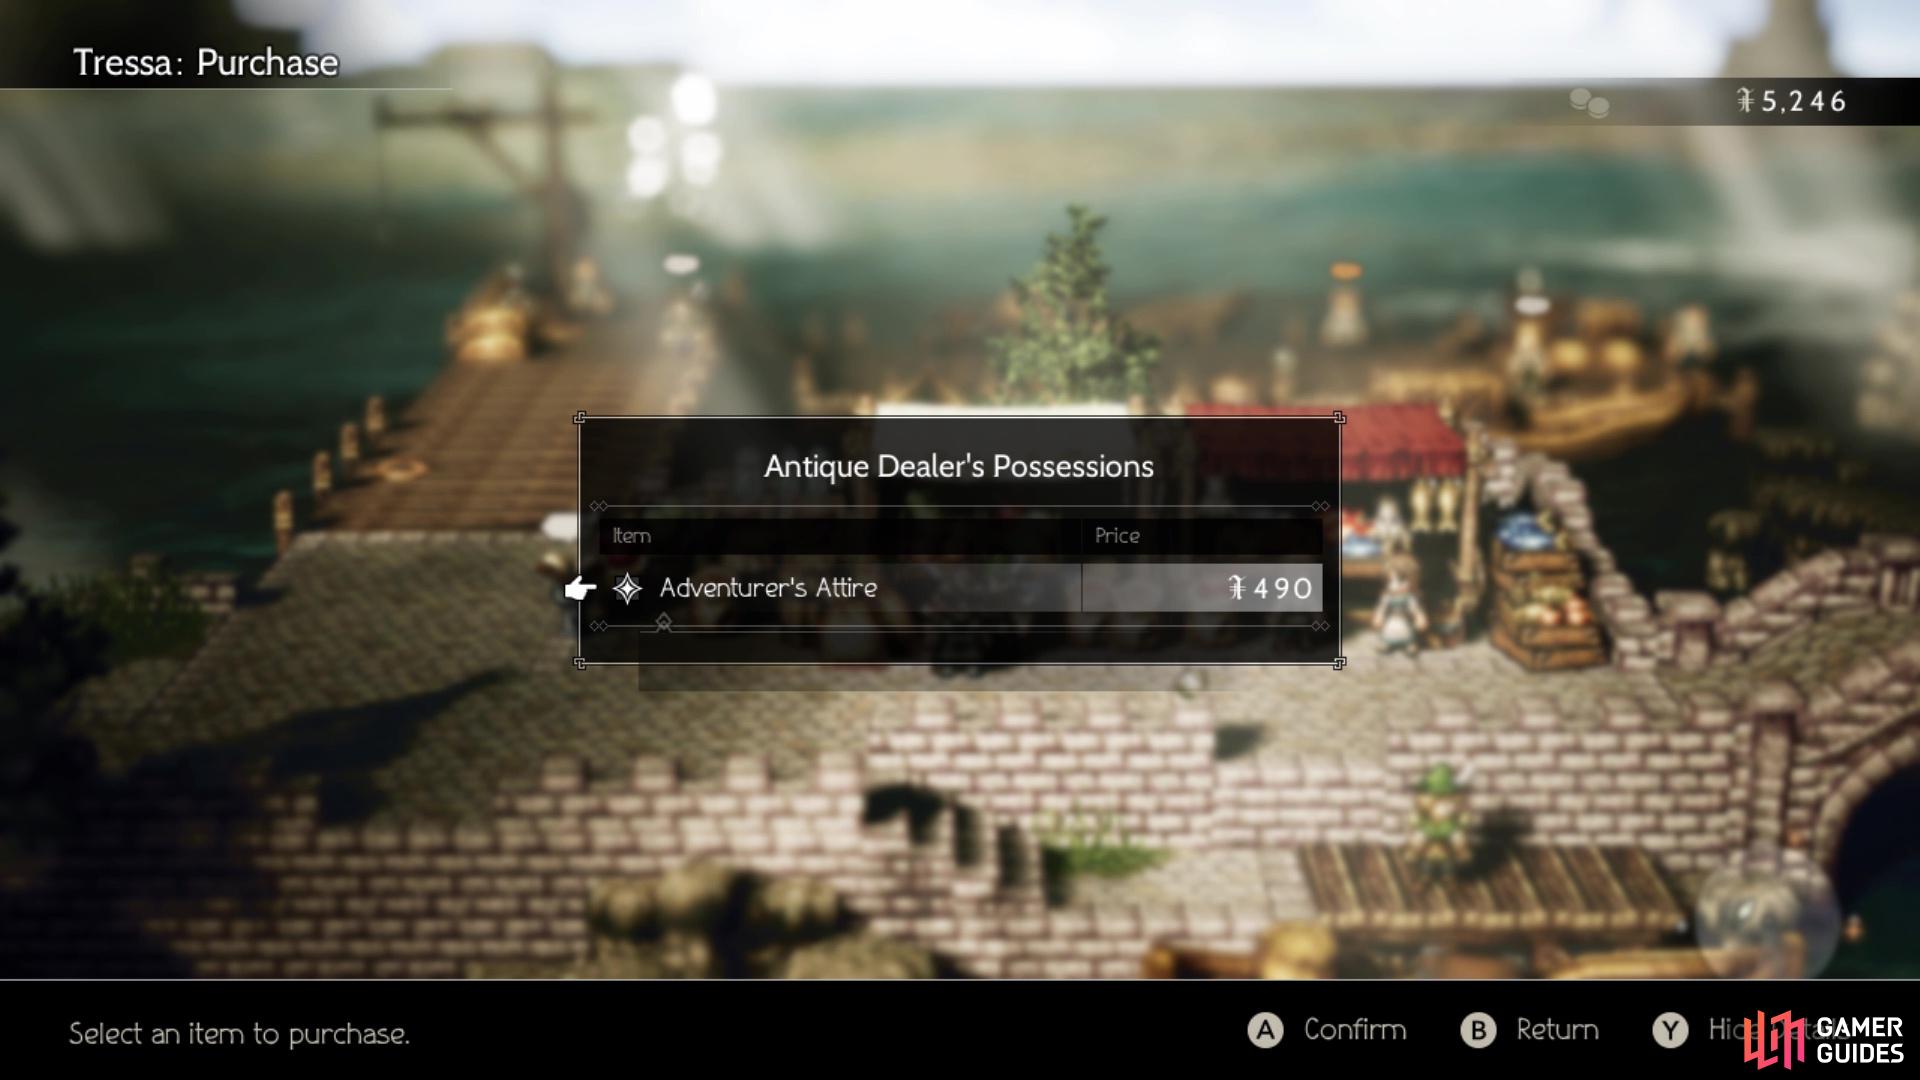 You can buy the Adventurers Attire from the Antique Dealer for Le Mann